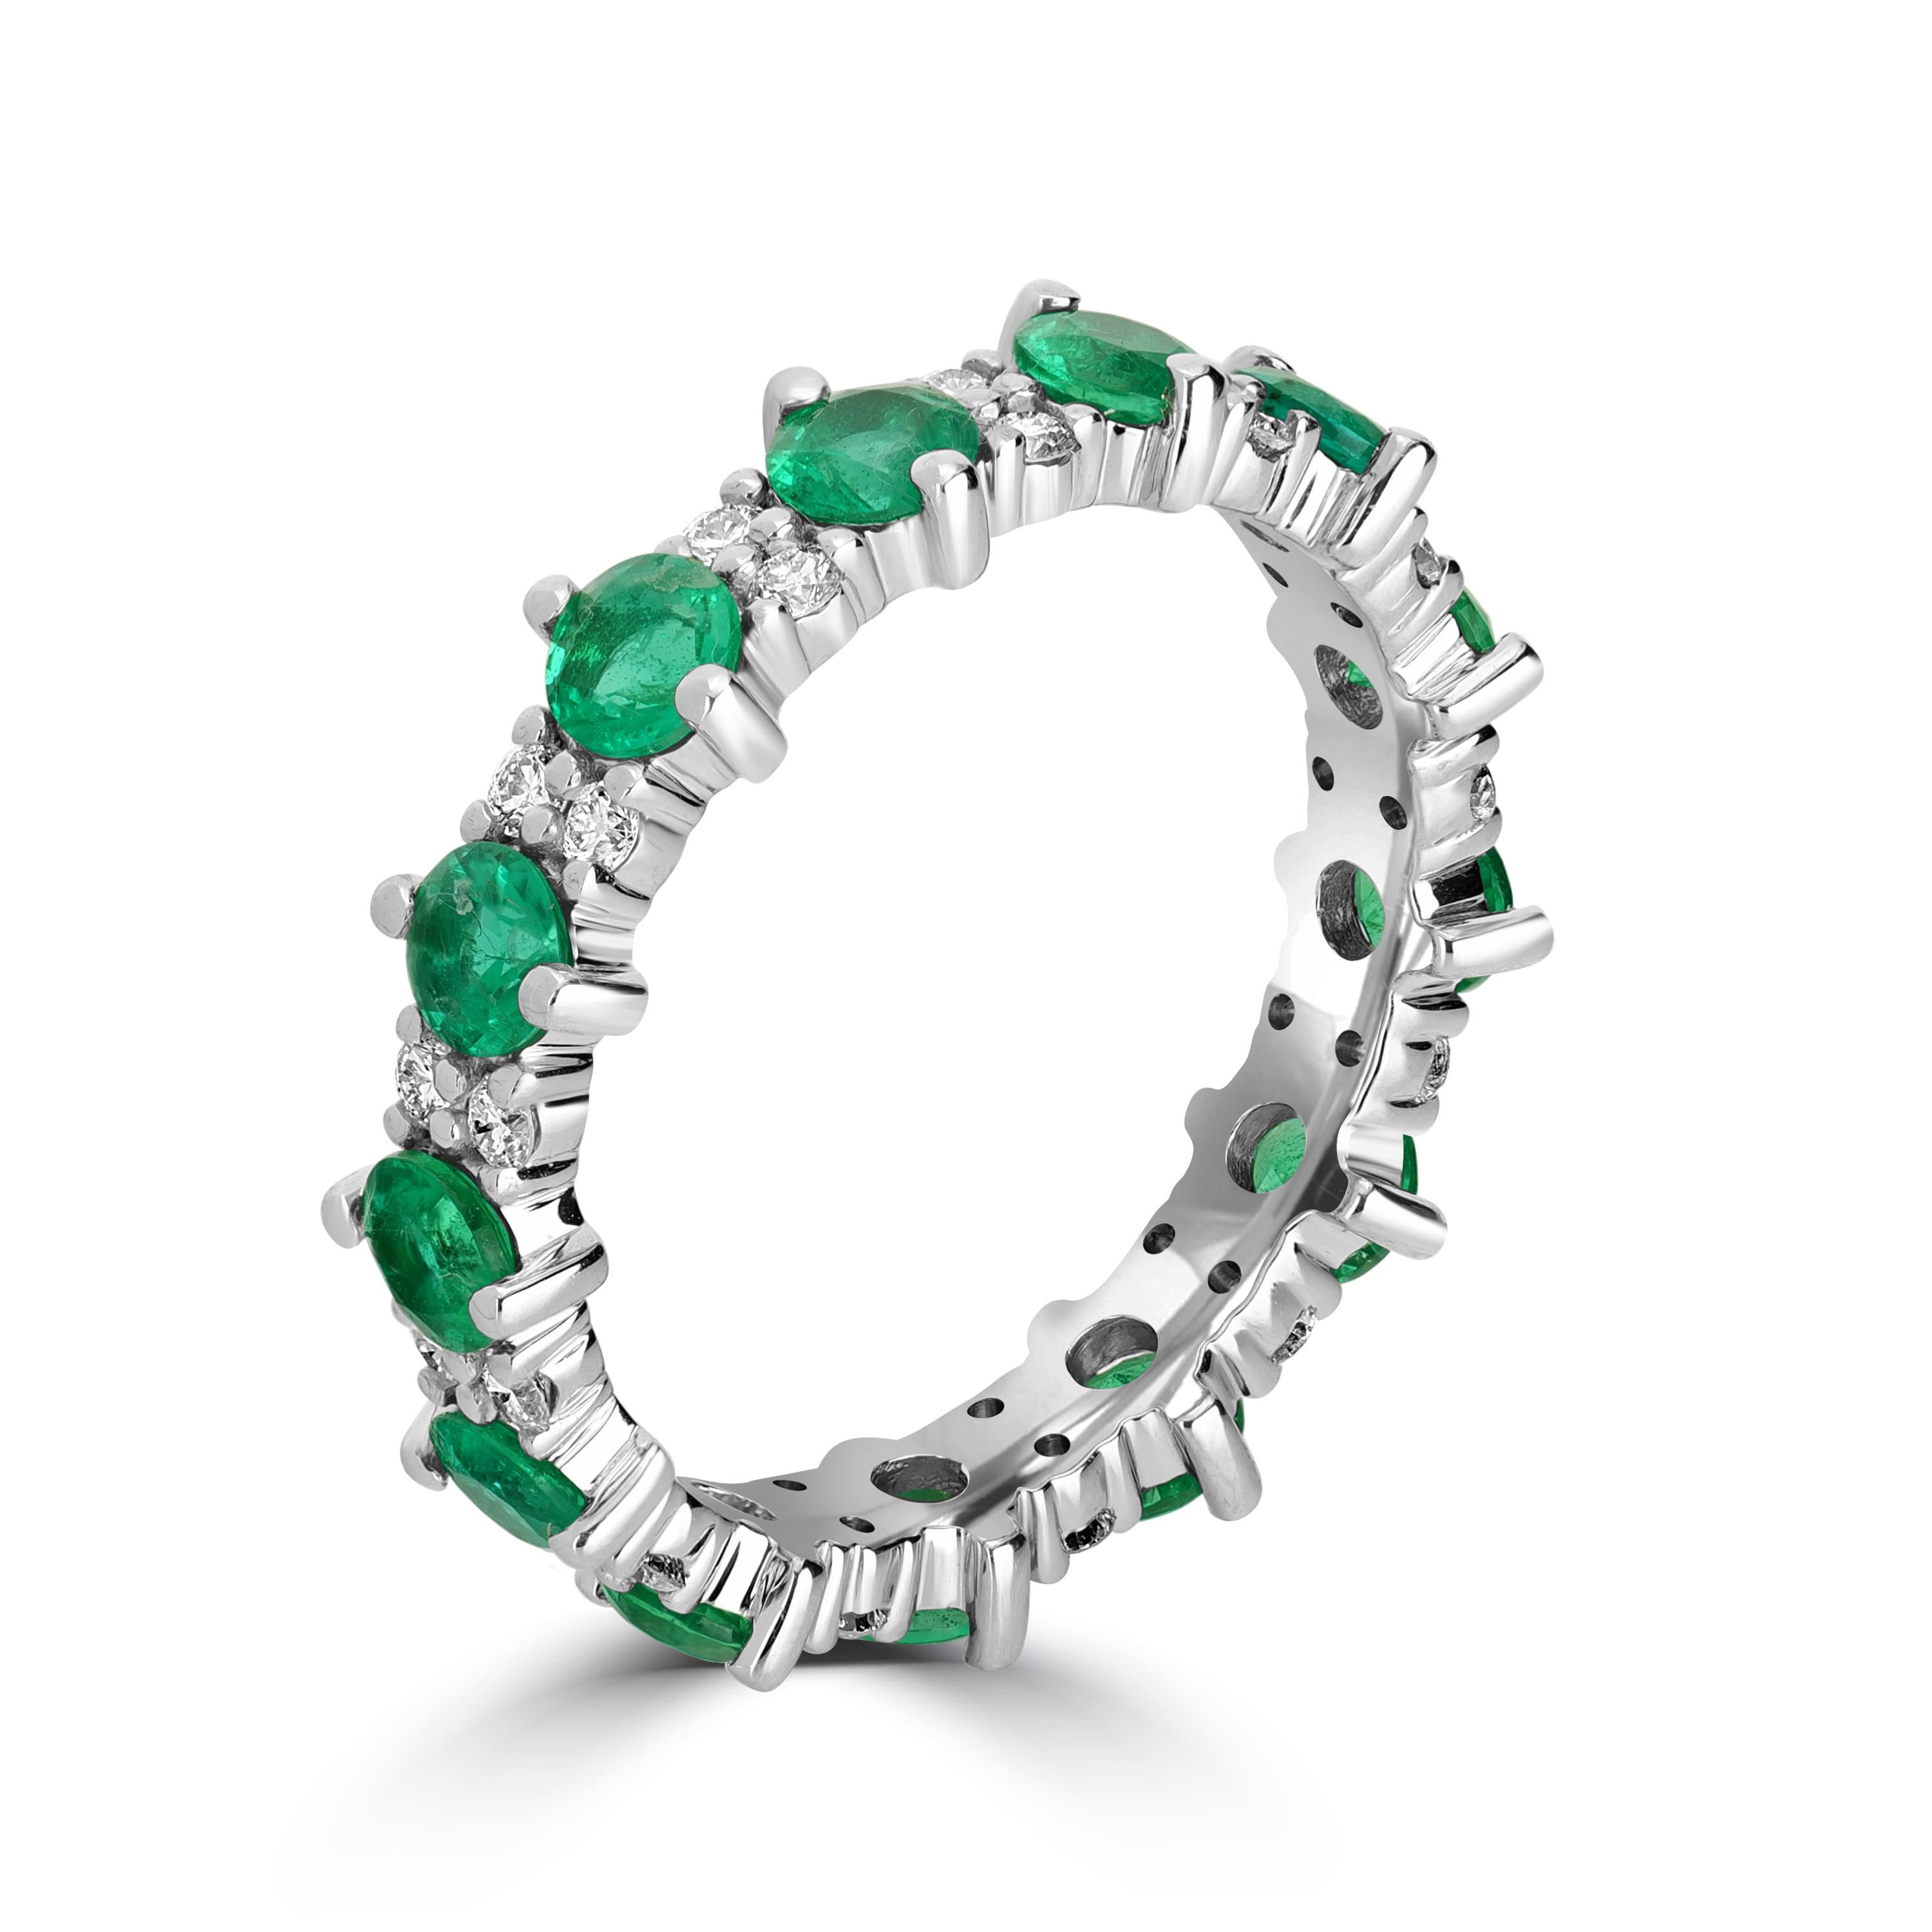 This everyday wear eternity band ring consists of emerald and diamonds of total 1.84 carats. What makes this ring so special? The reason are the stones used, The emeralds and diamonds used are non commercial quality meaning they are of a rare